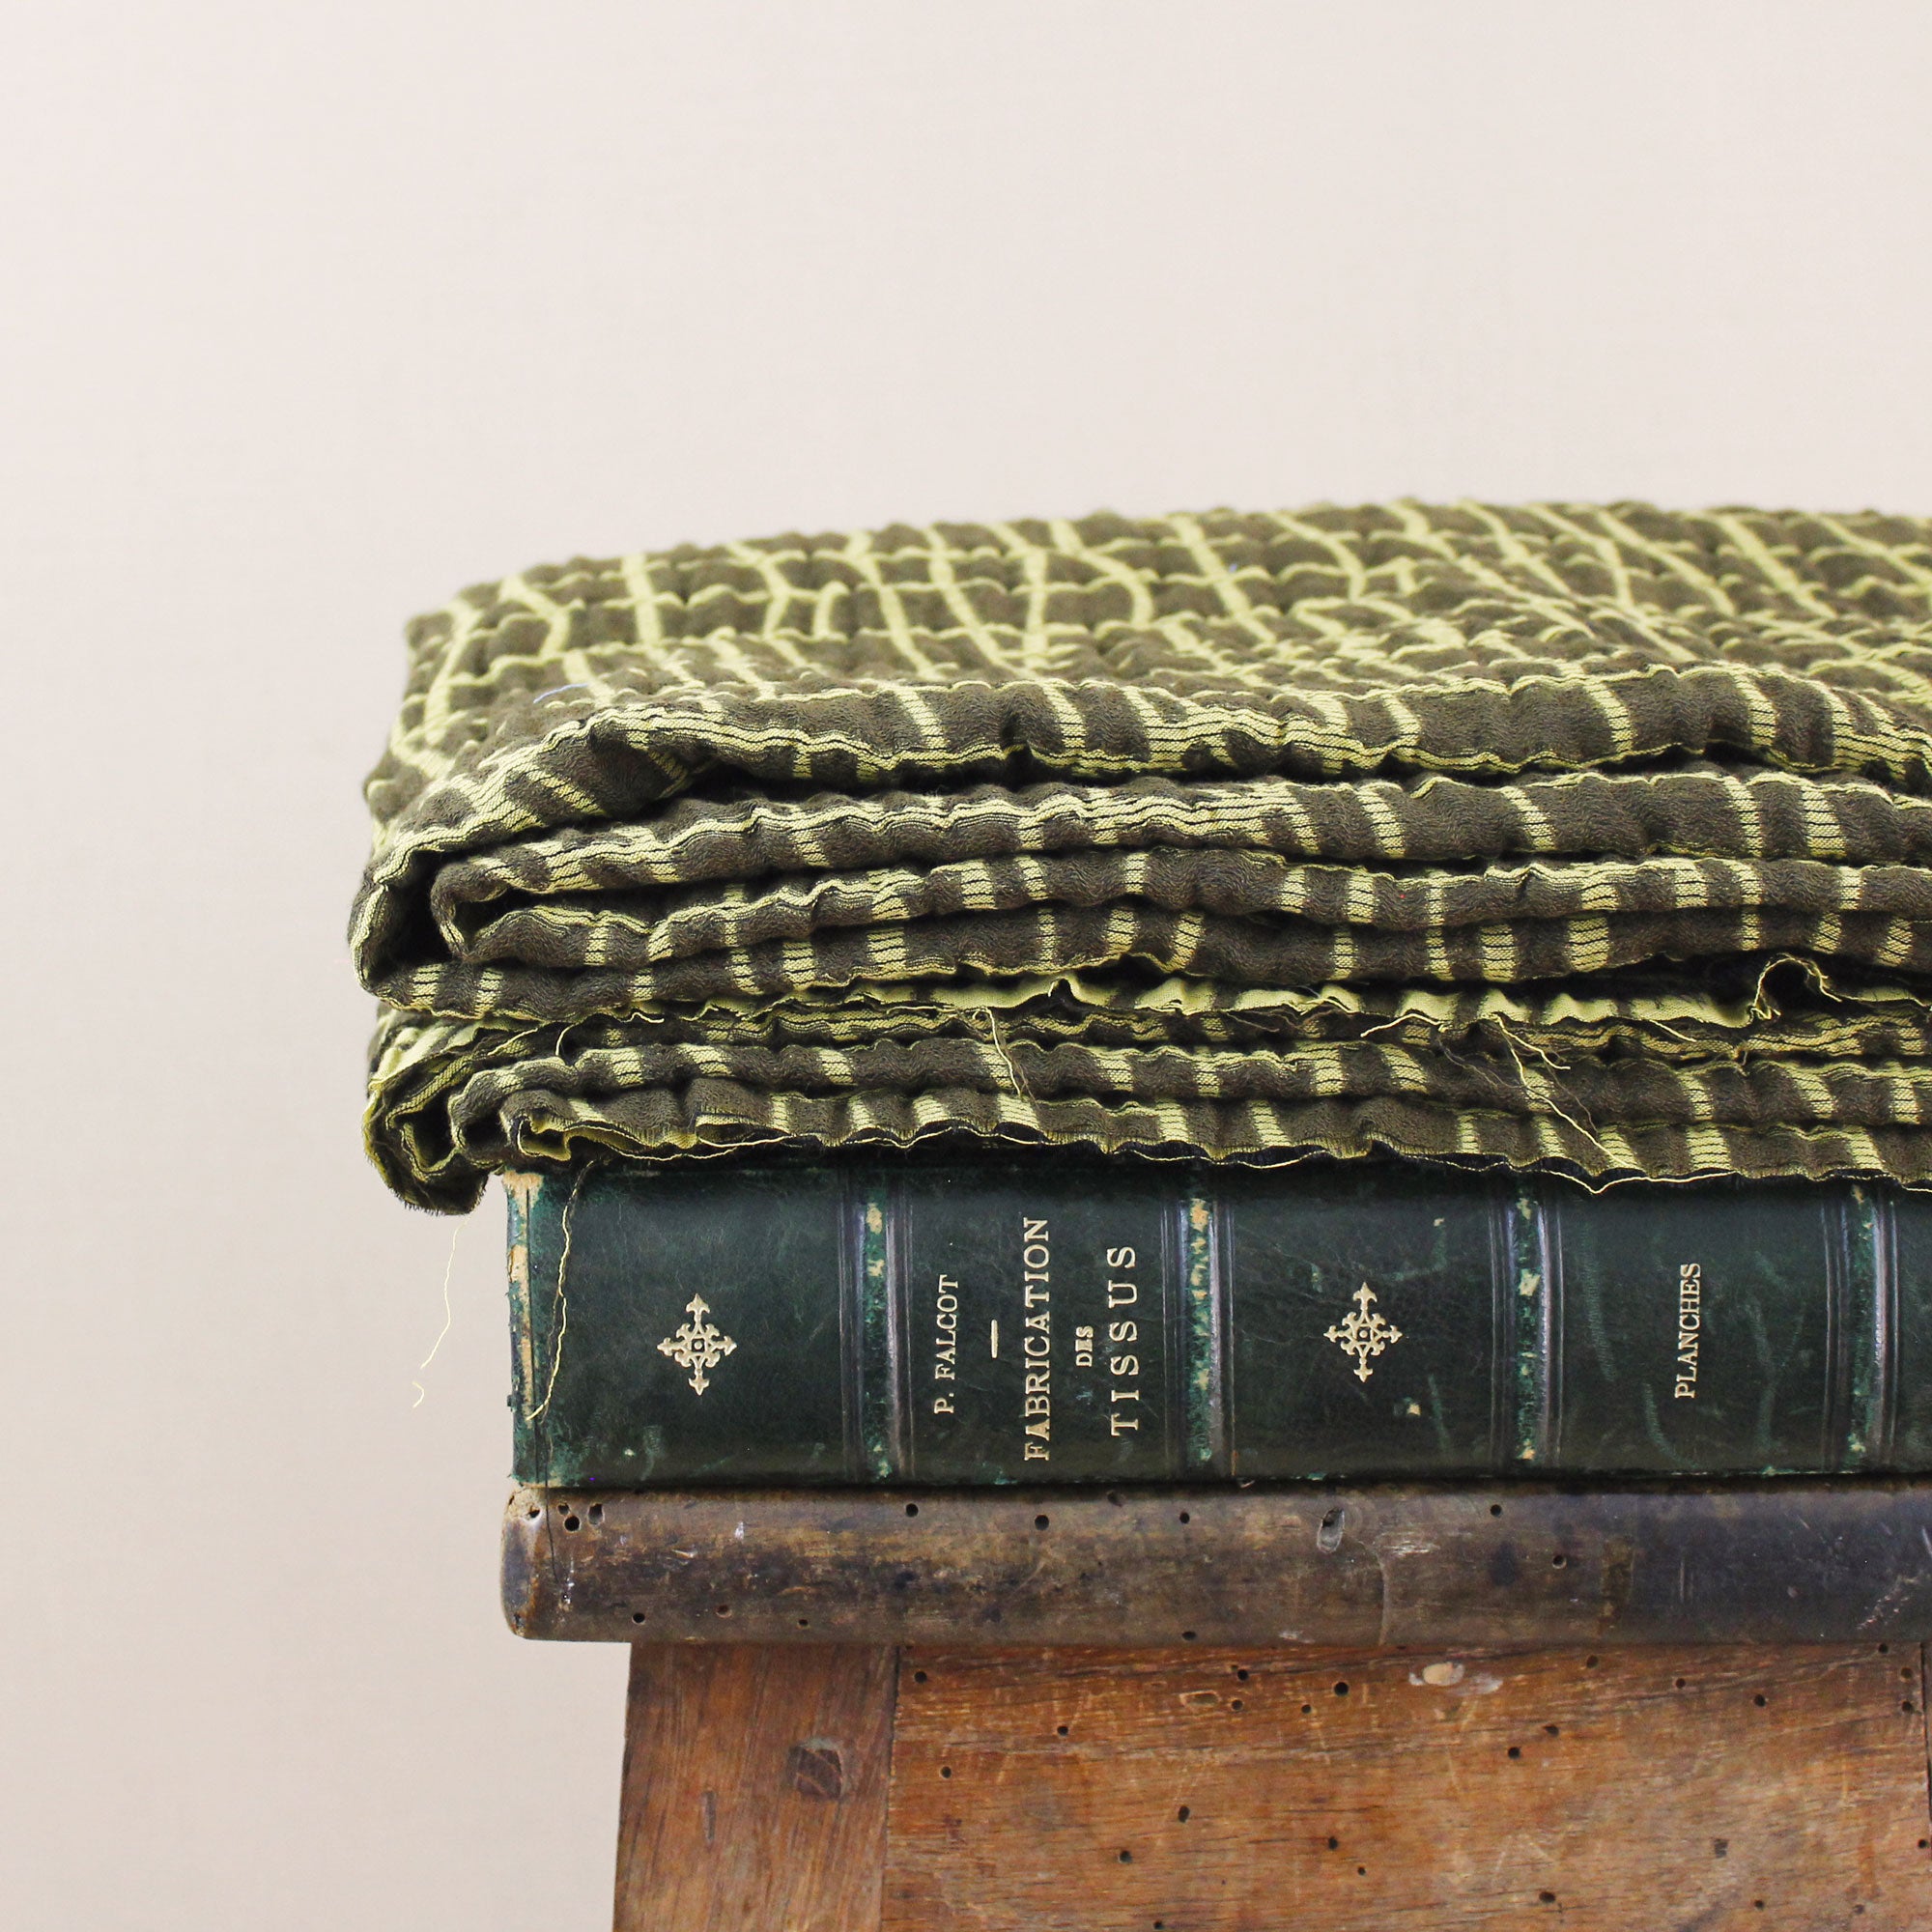 Reversible cotton jacquard fabric with olive green and khaki checks